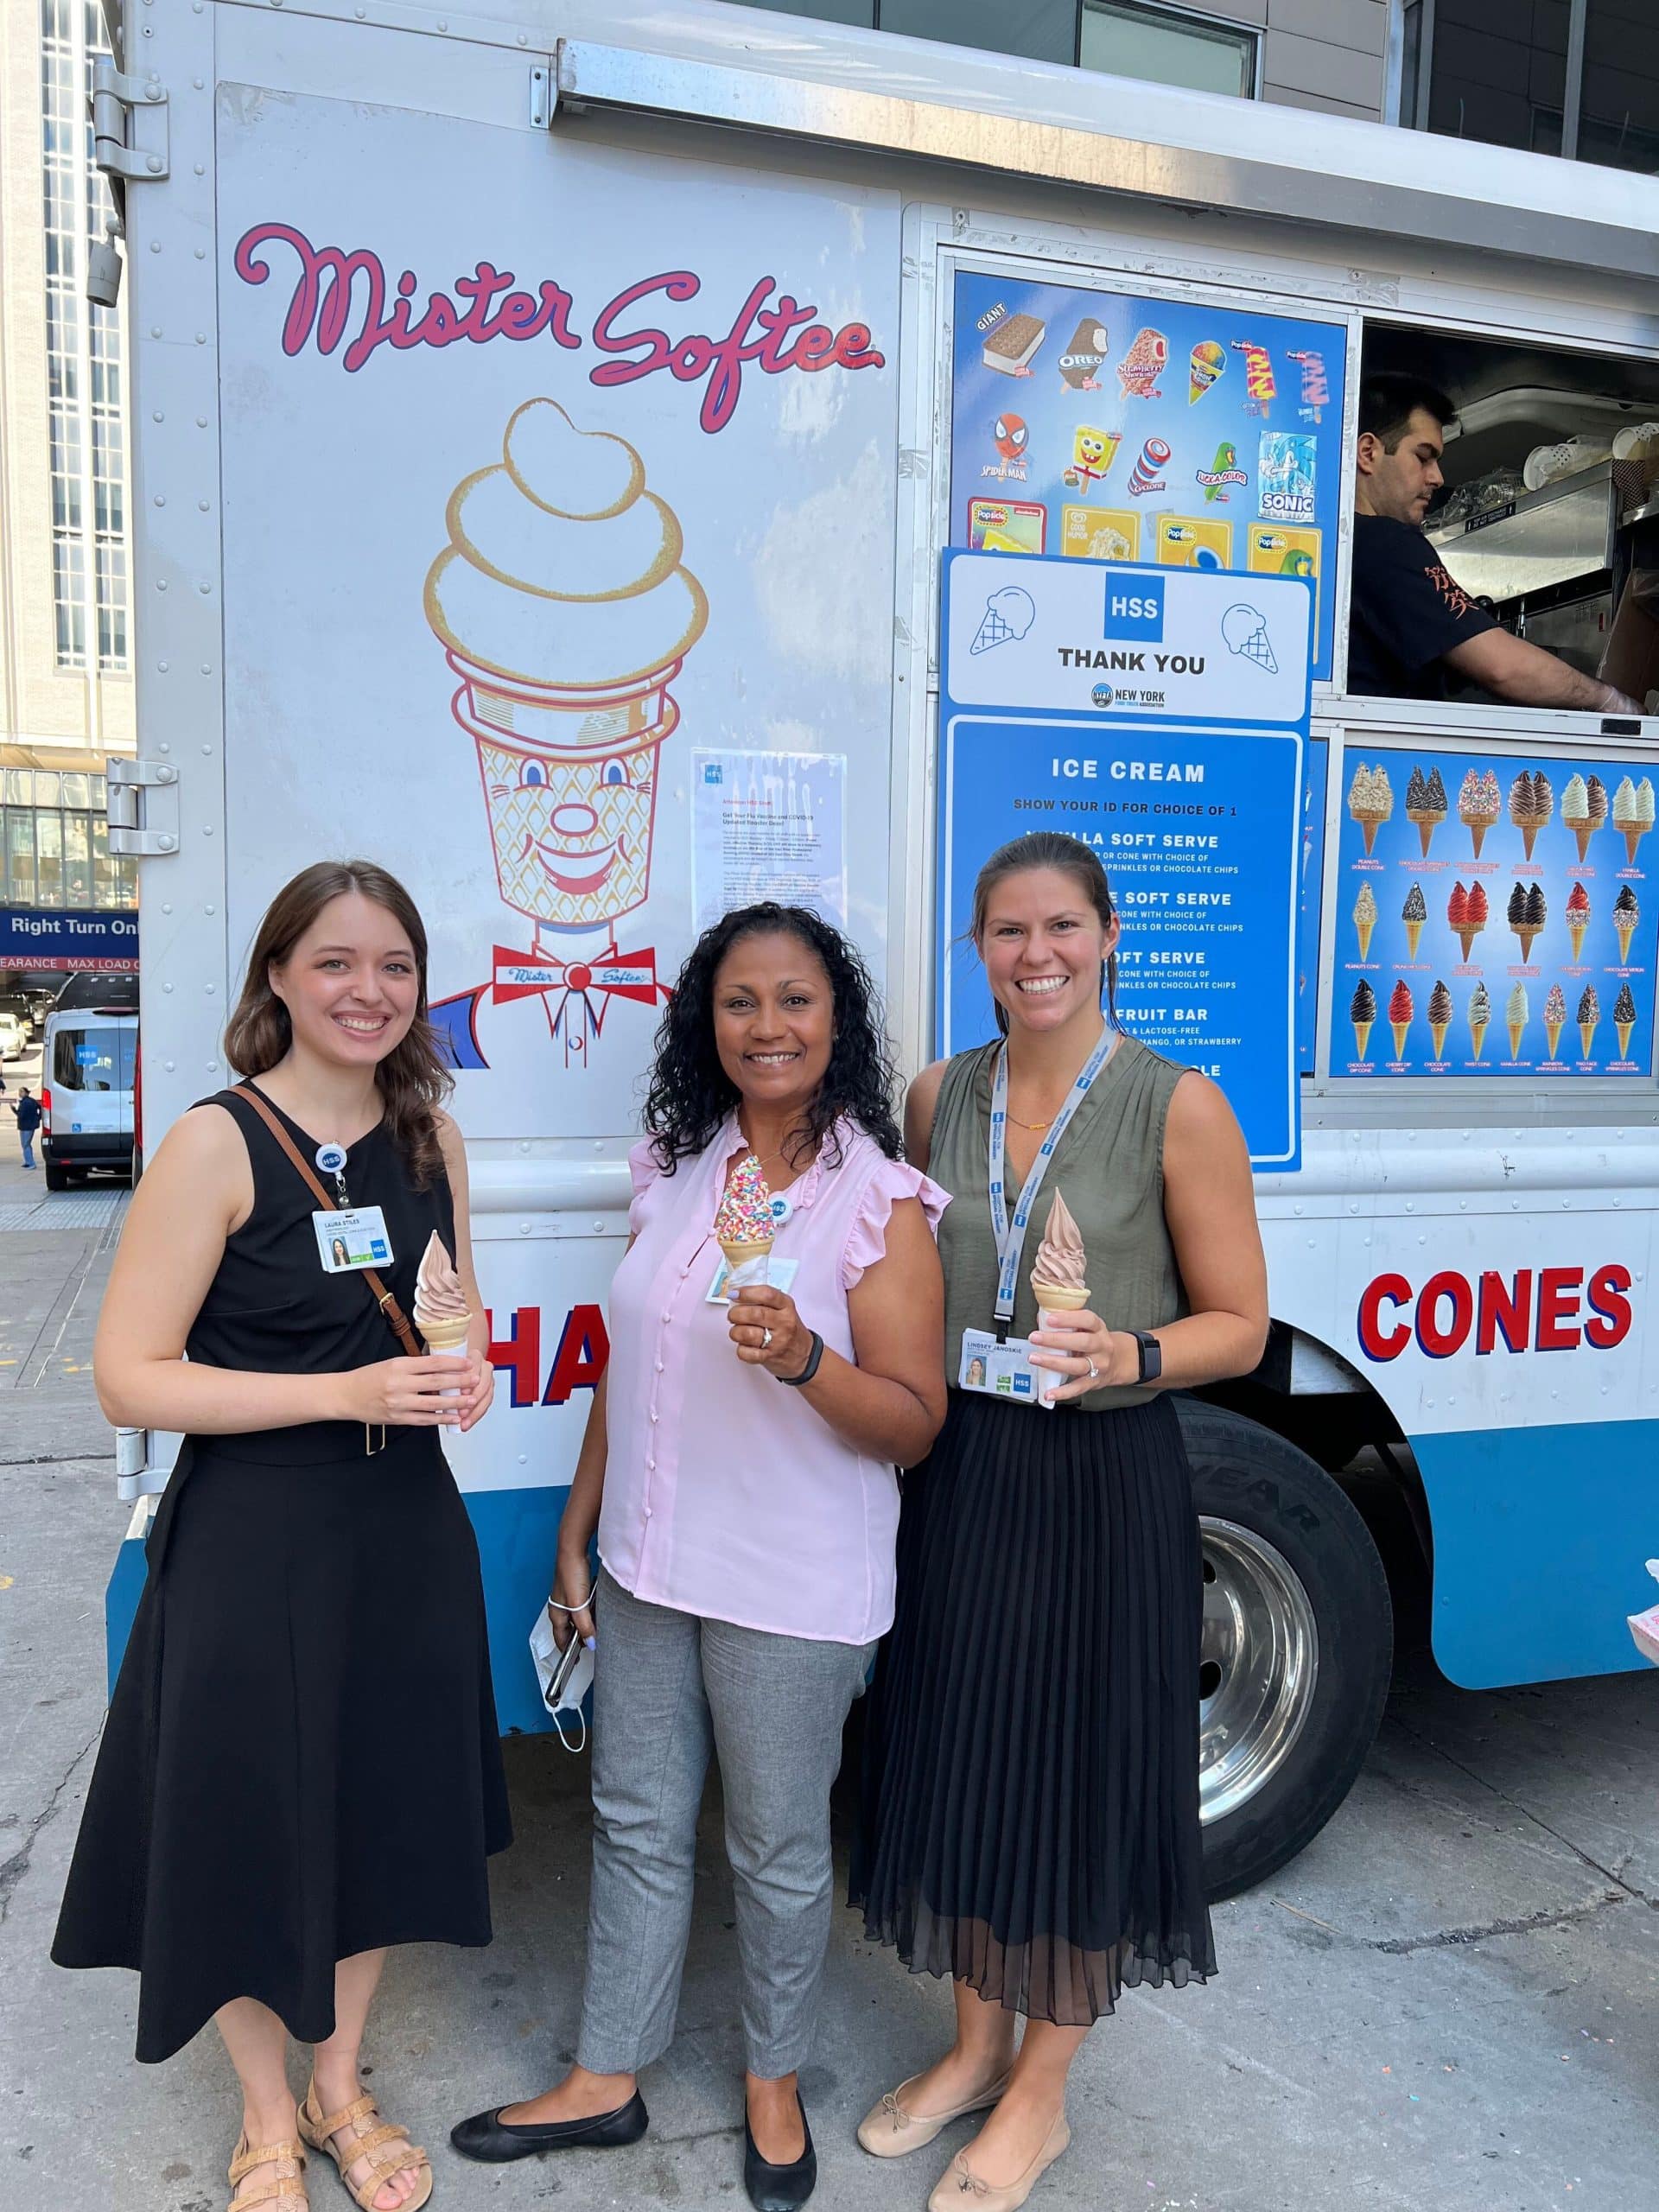 HSS employees with ice cream in front of Mister Softee ice cream truck